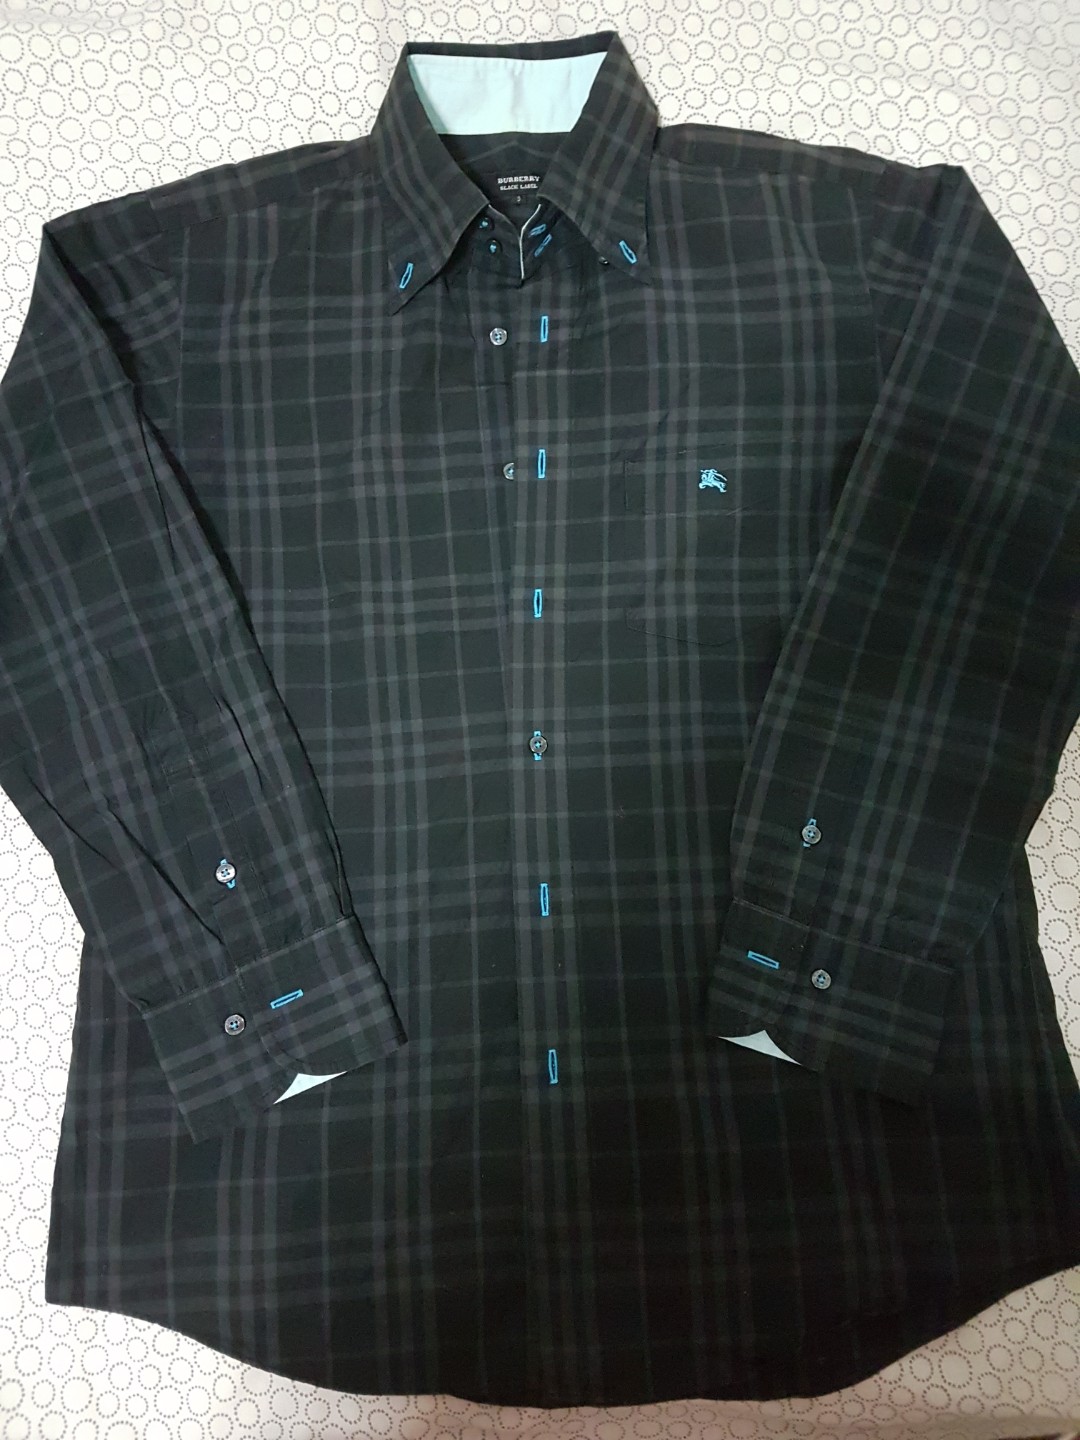 burberry black button up